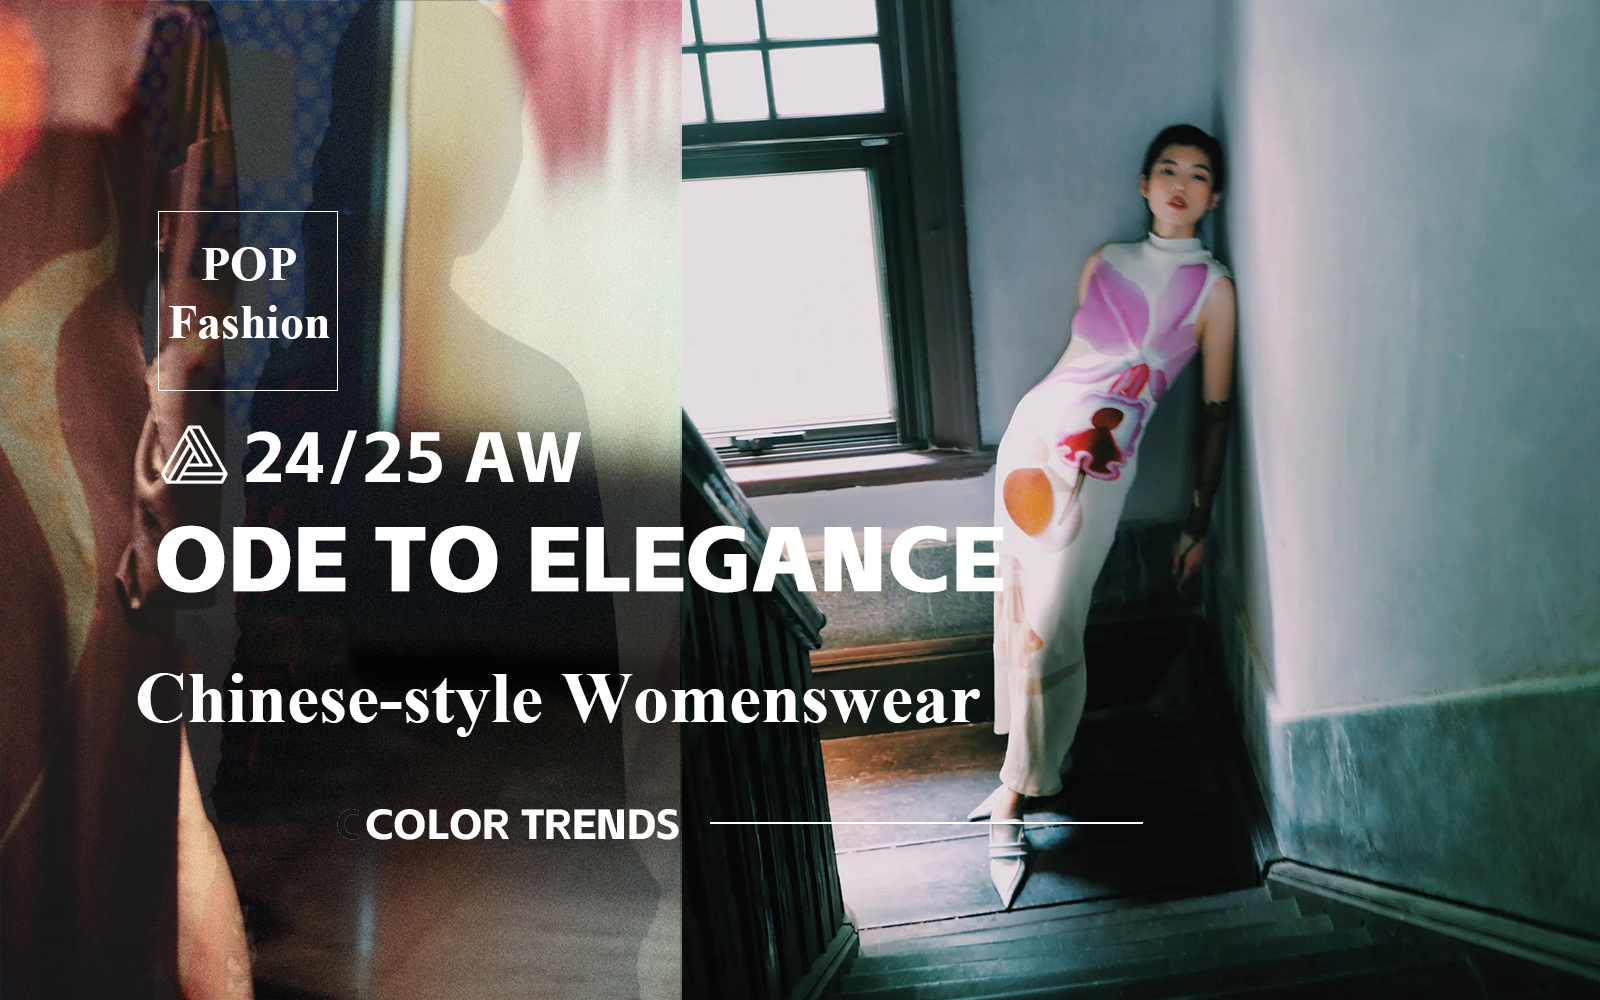 Ode to Elegance -- The Color Trend for Chinese-style Womenswear